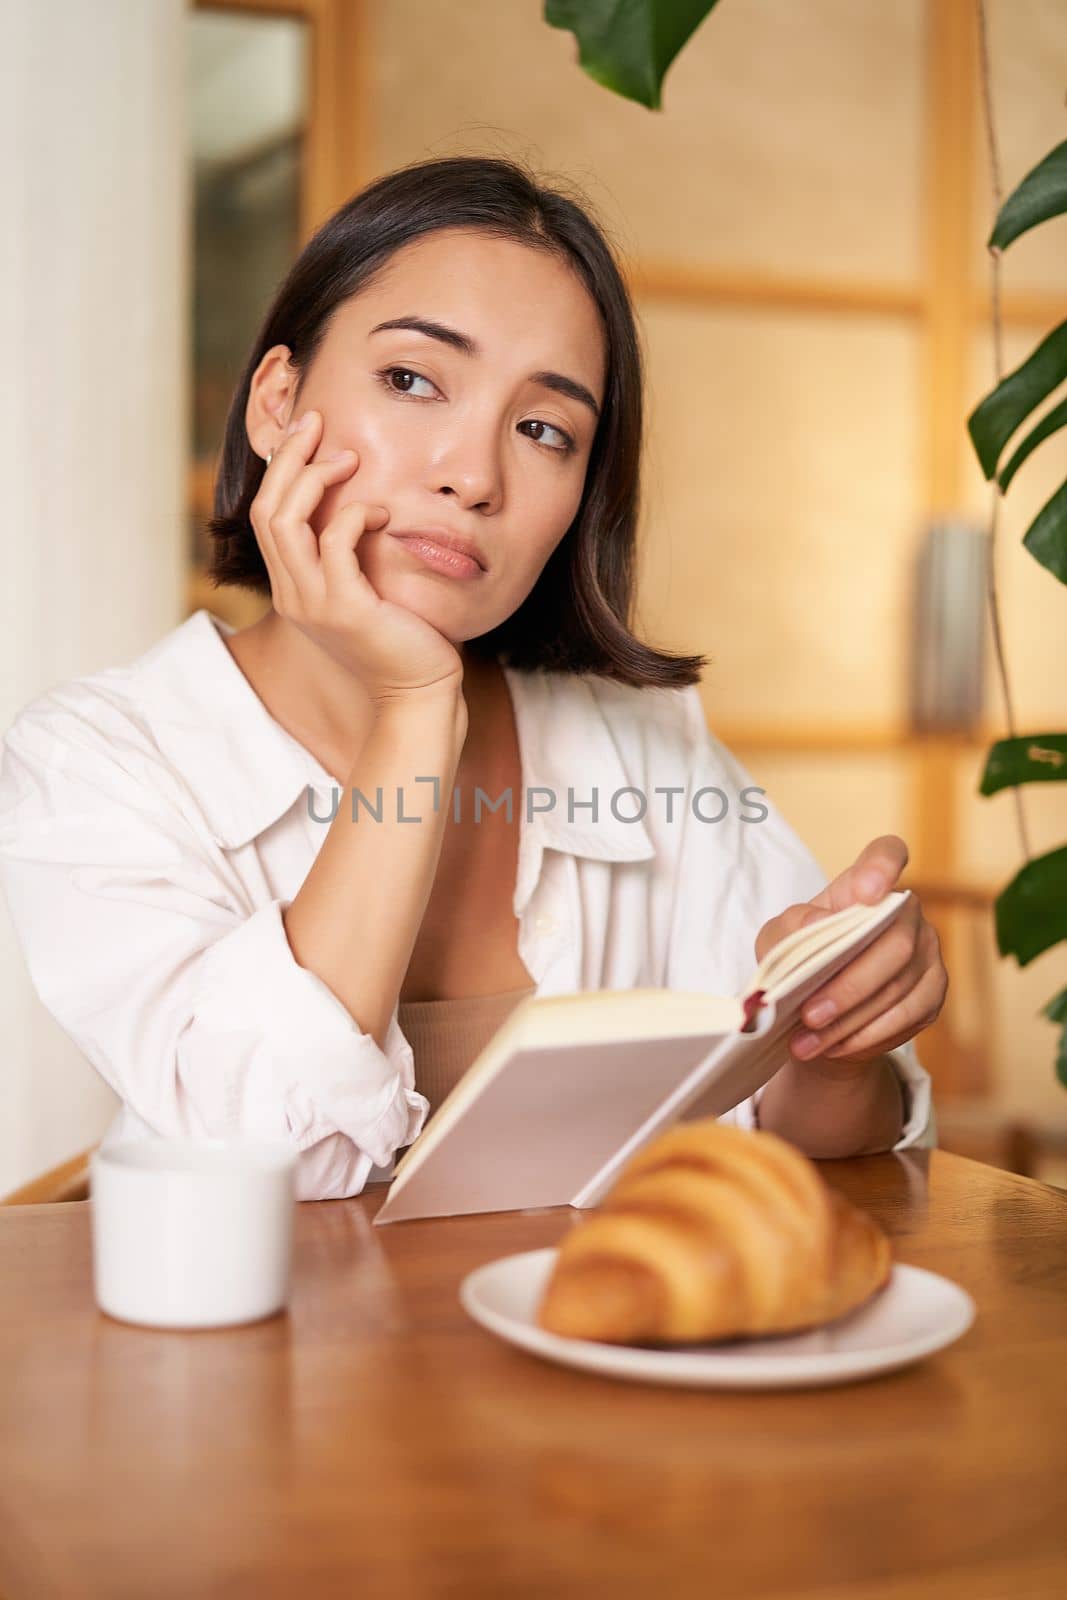 Vertical shot of asian girl sits alone in cafe, reads book and looks upset, drinks coffee with croissant.